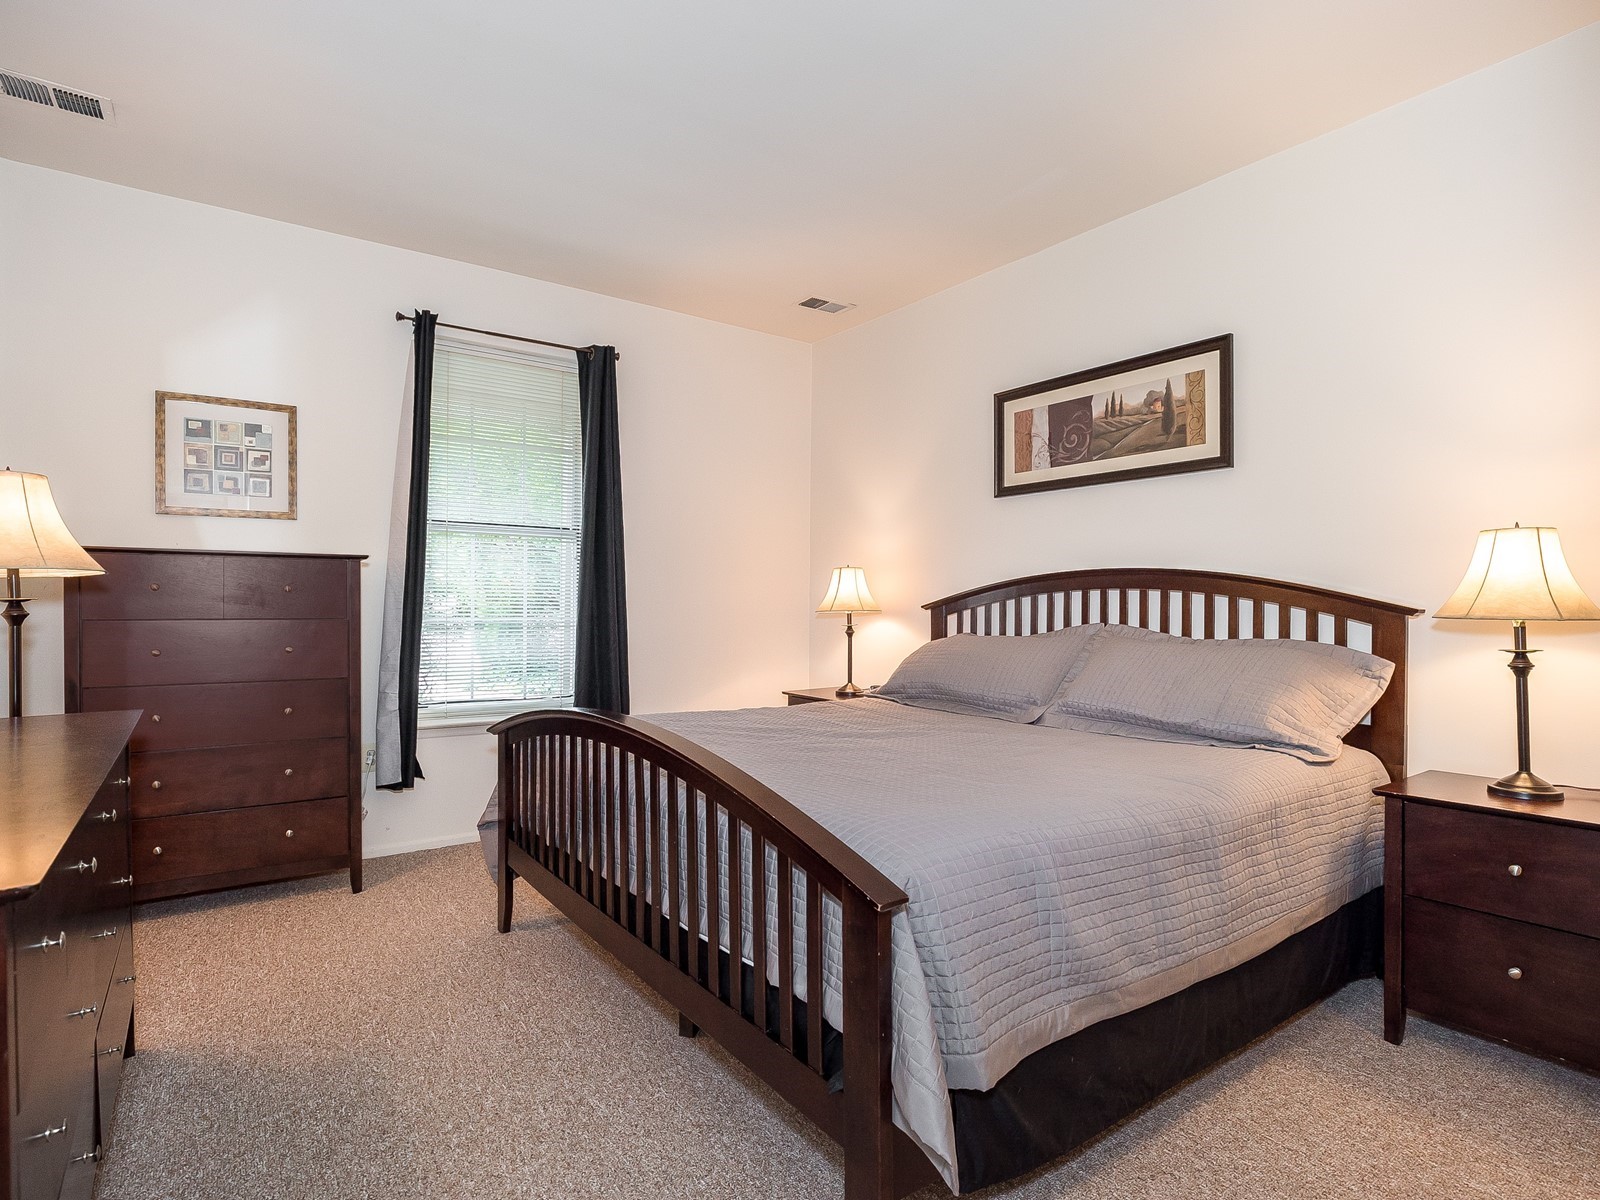 Furnished Apartment South Brunswick 3361 with king sized bed, two dressers and two nightstands